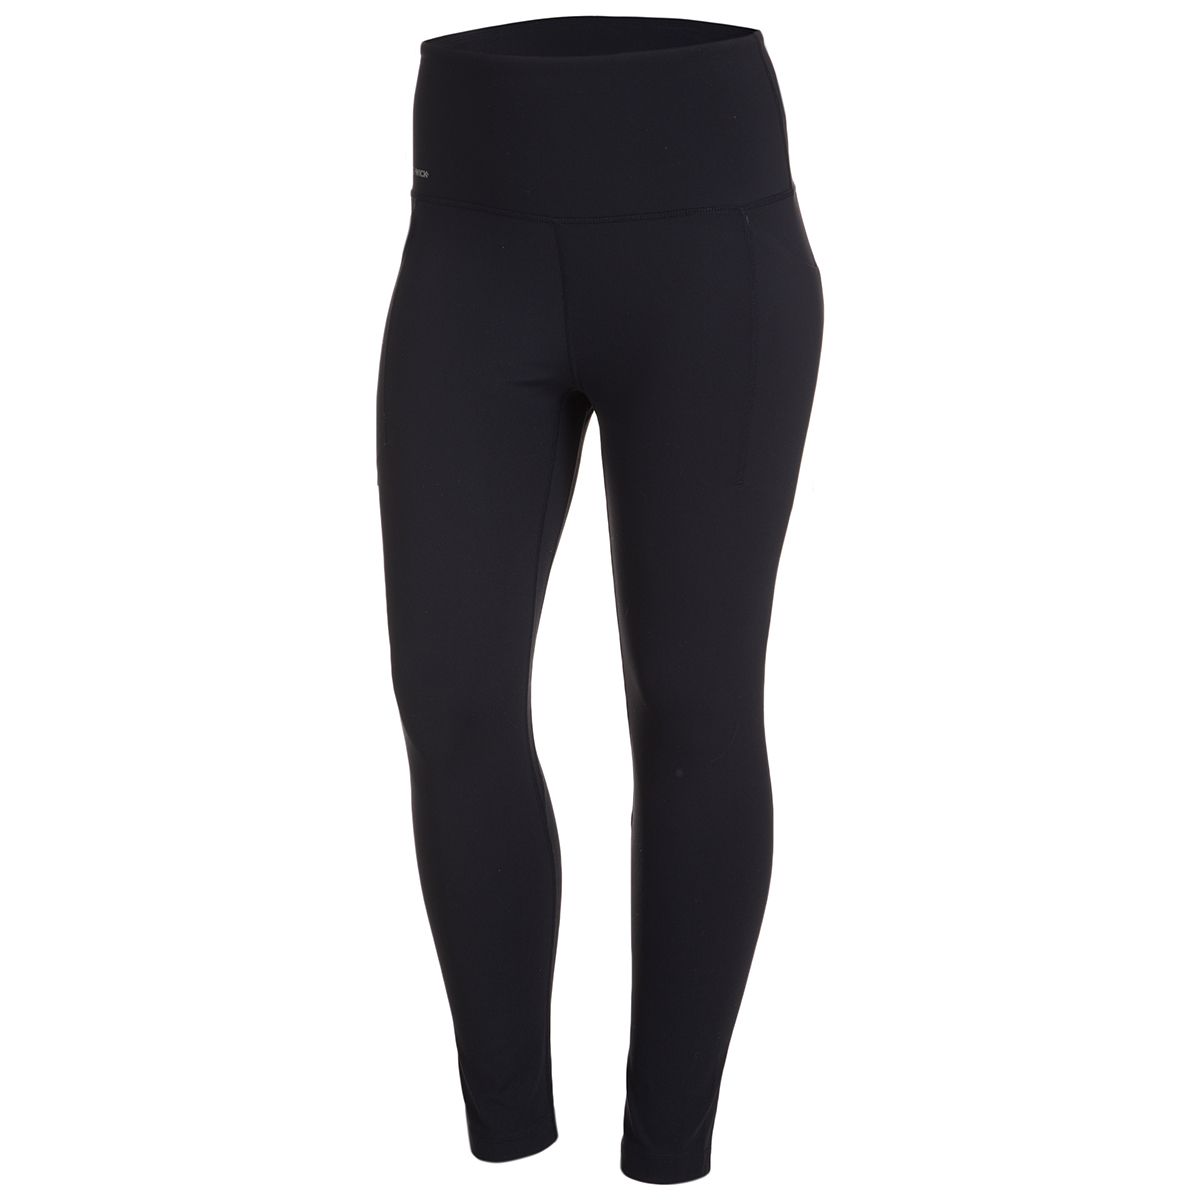 Rbx Active Black Leggings With Pockets Size L - $8 (60% Off Retail